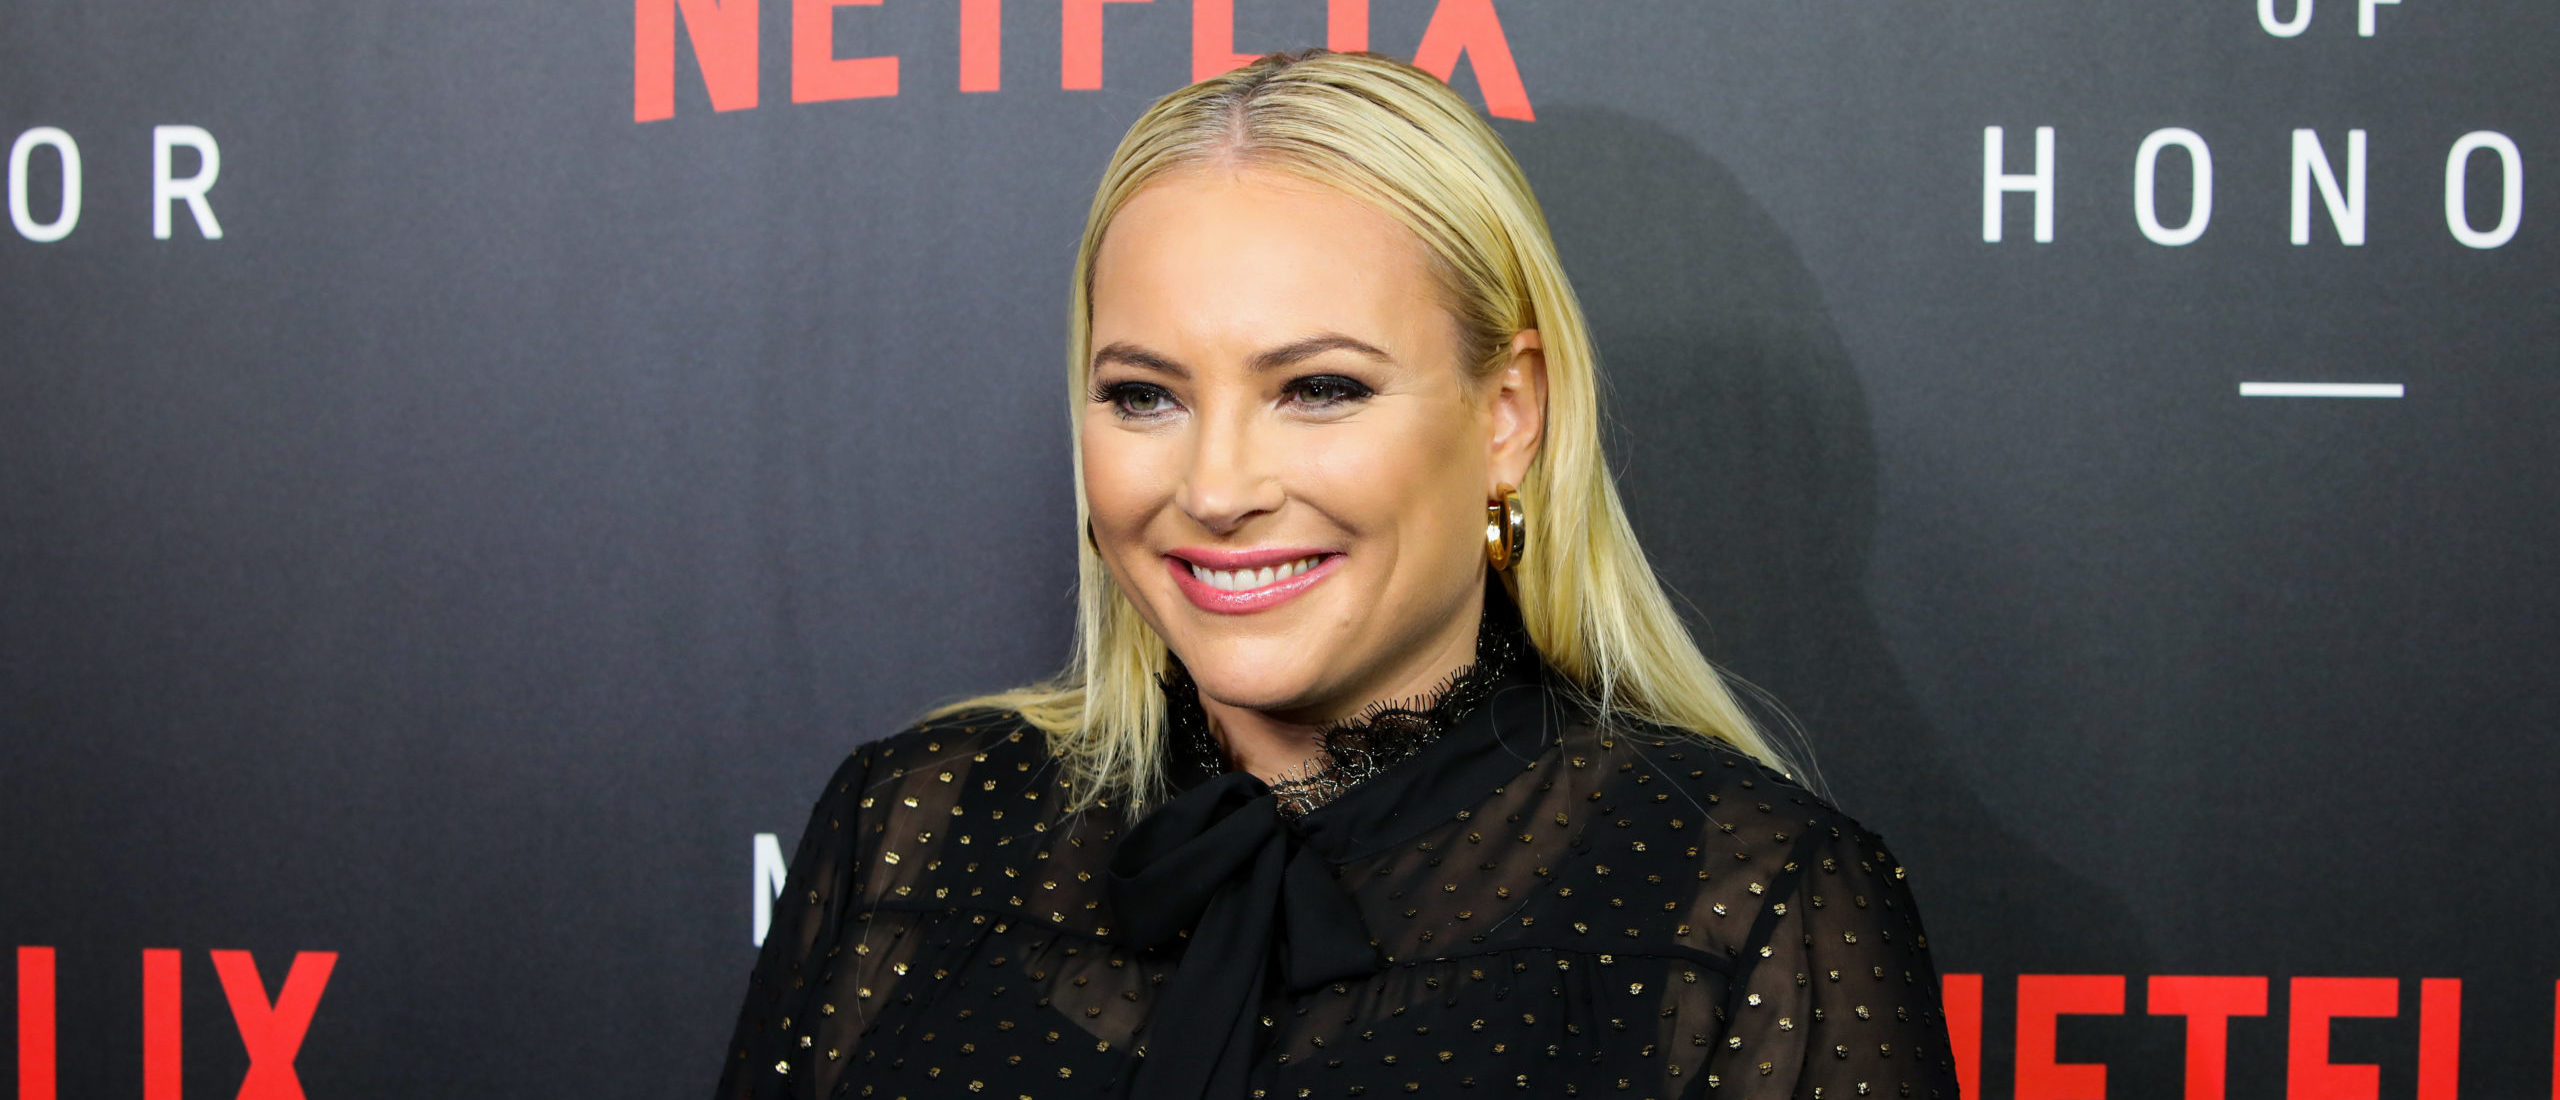 WASHINGTON, DC - NOVEMBER 13: Meghan McCain, Co-Host of 'The View', at the Netflix 'Medal of Honor' screening and panel discussion at the US Navy Memorial Burke Theater on November 13, 2018 in Washington, DC. (Photo by Tasos Katopodis/Getty Images for Netflix)